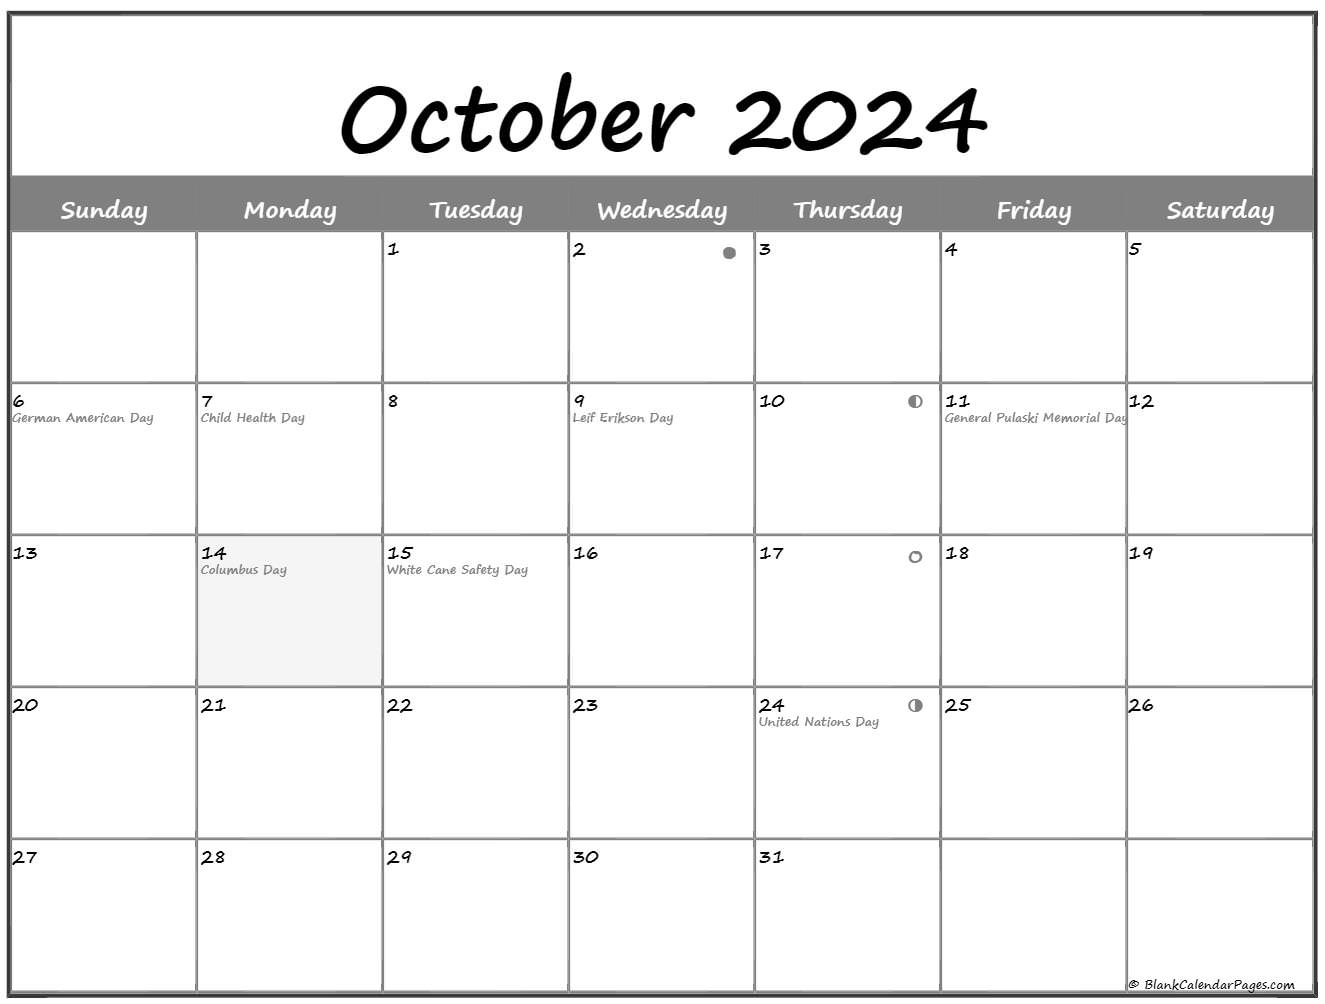 october-2020-moon-phases-moon-calendar-august-2020-in-2020-moon